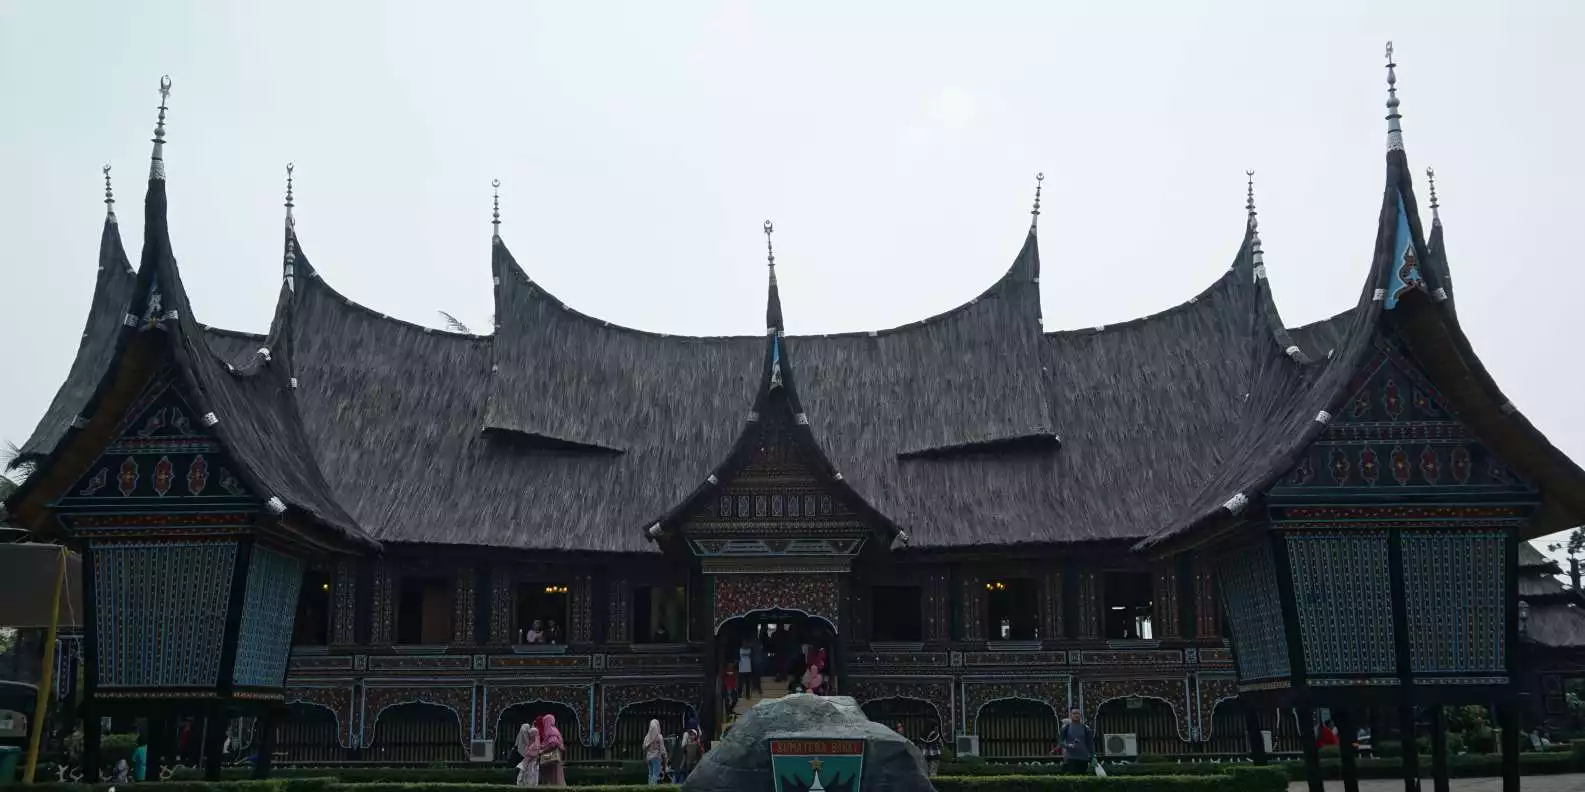 Jakarta: National Monument and Miniature Indonesia Tour | GetYourGuide